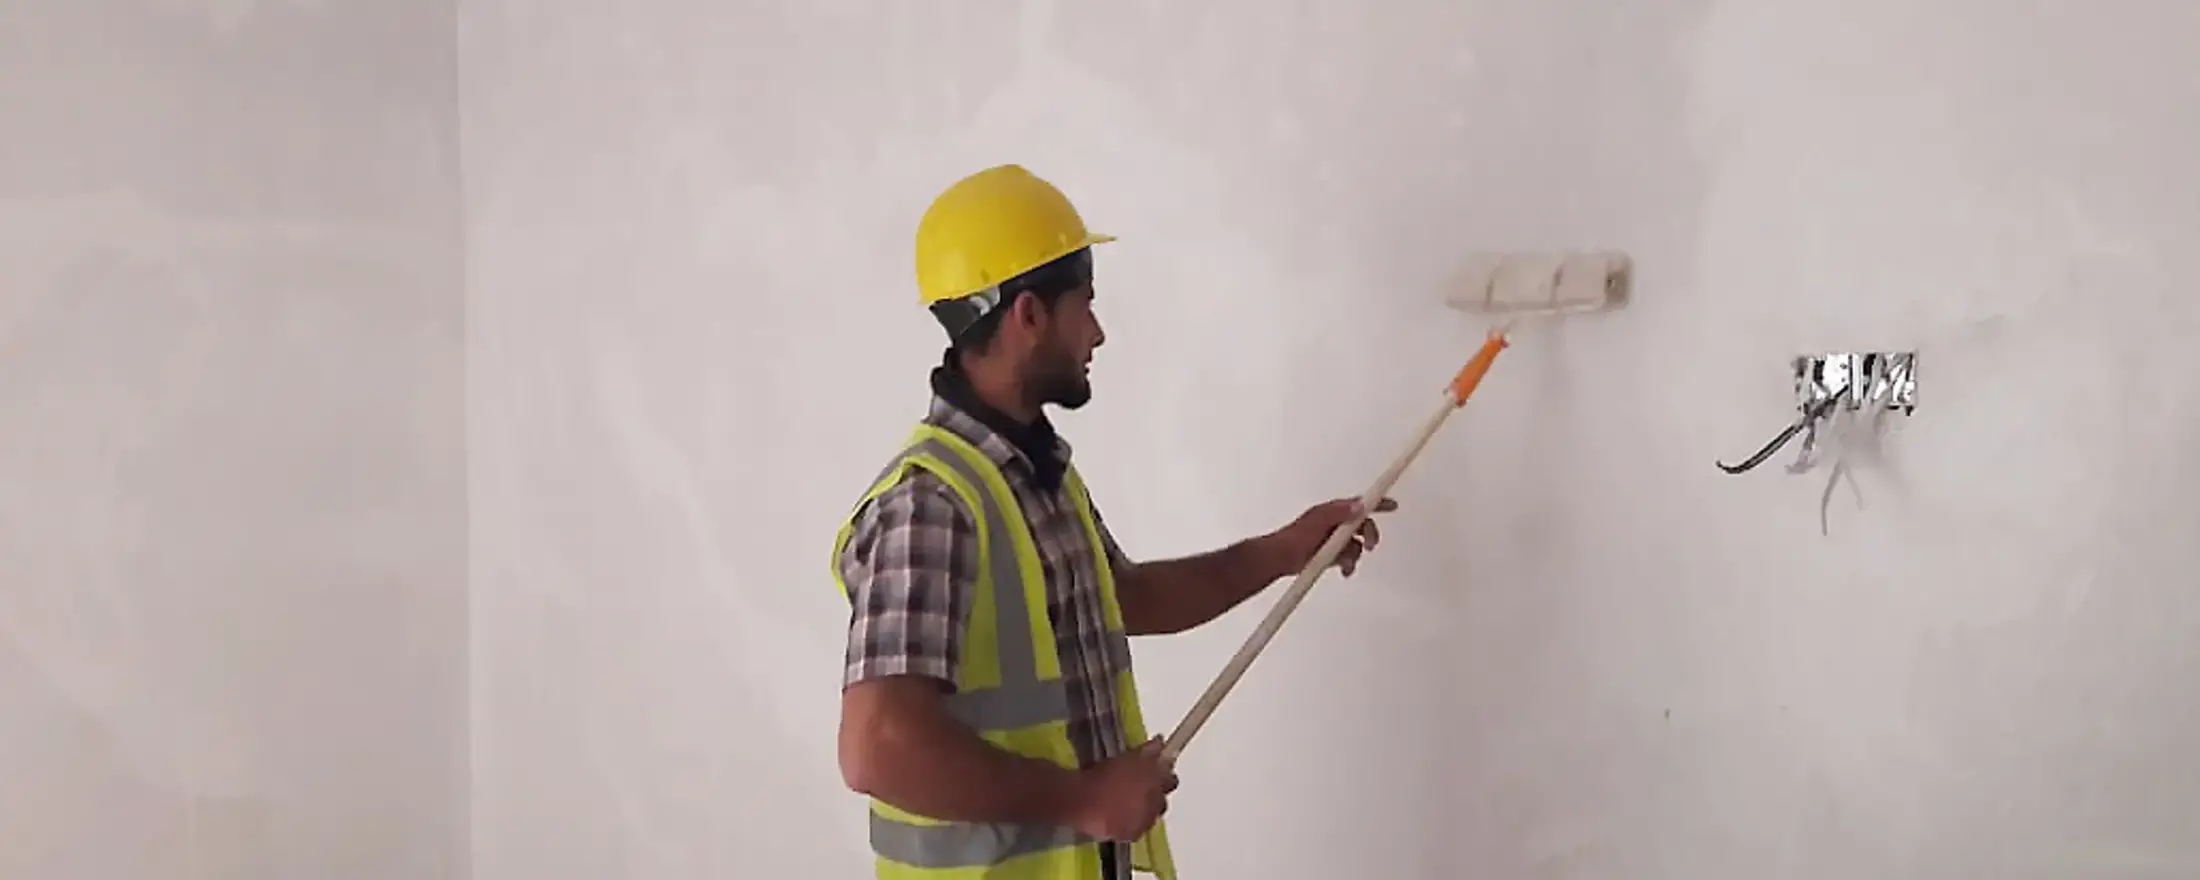 Mohammed Madi Ahmad, skilled labourer from a rural town of Yathrib, Iraq, was fortunate to be able to earn salary during the COVID-19 outbreak thanks to ongoing EU-funded house rehabilitation project. 28 April 2020, Yathrib, Iraq